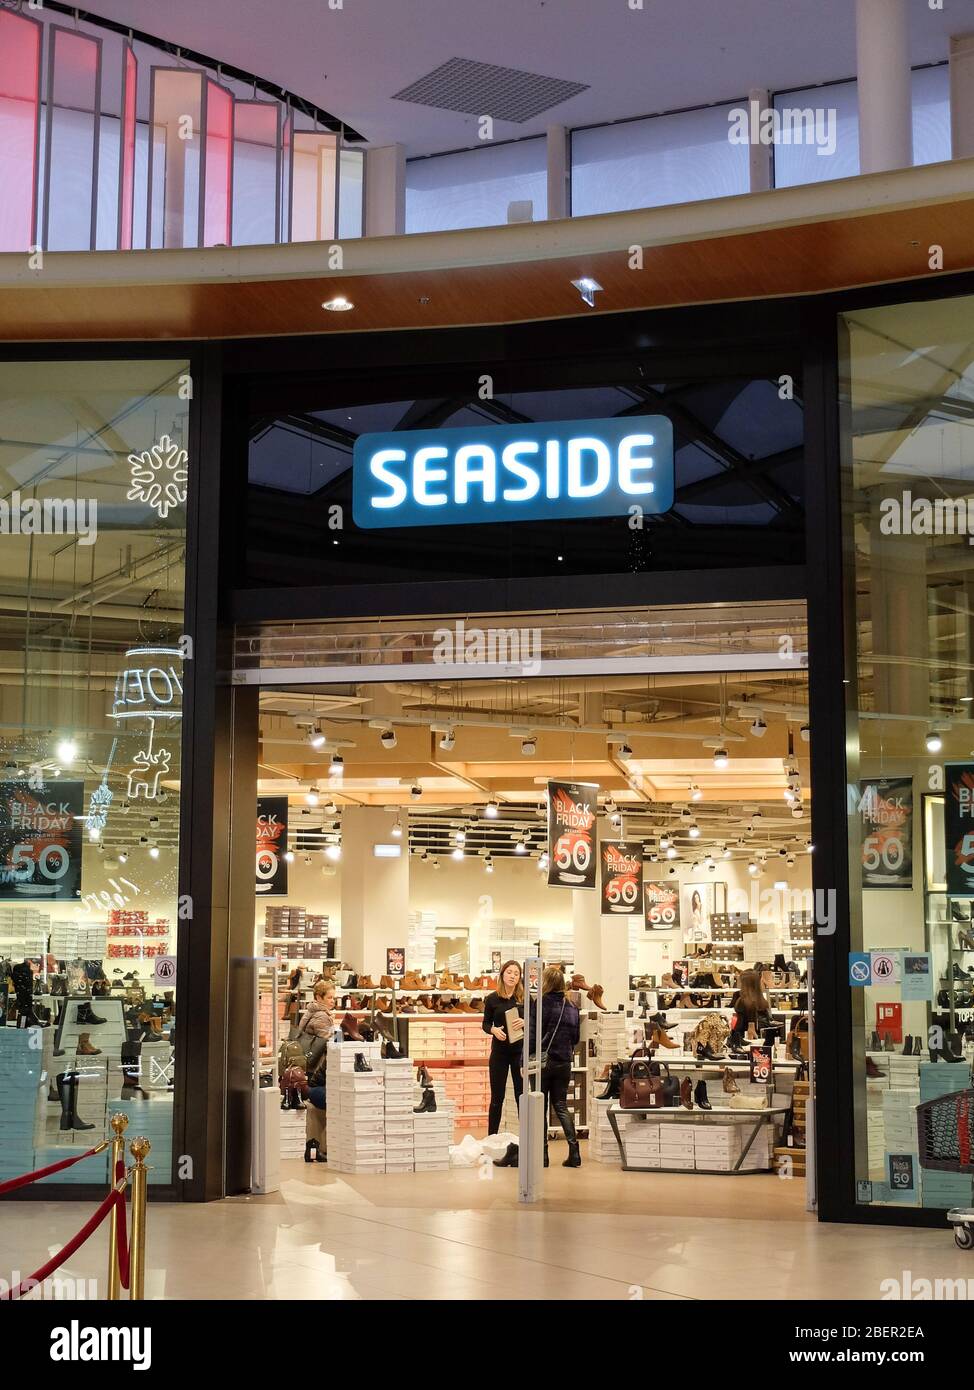 Seaside storefront. Seaside is a clothing store Stock Photo - Alamy